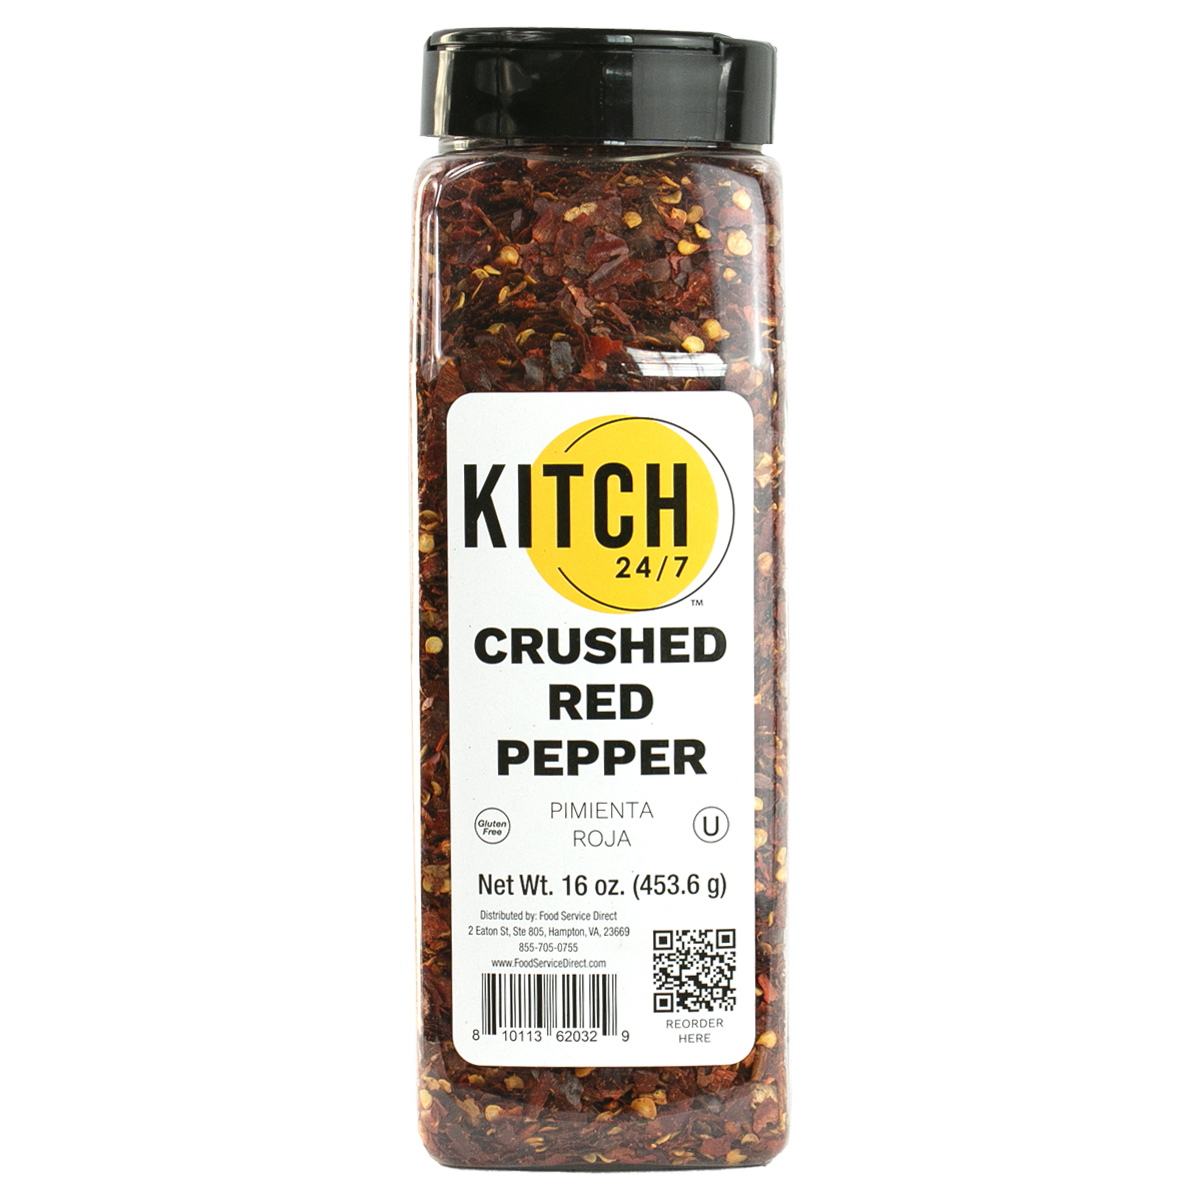 KITCH 24/7 Crushed Red Pepper, 12 Ounce